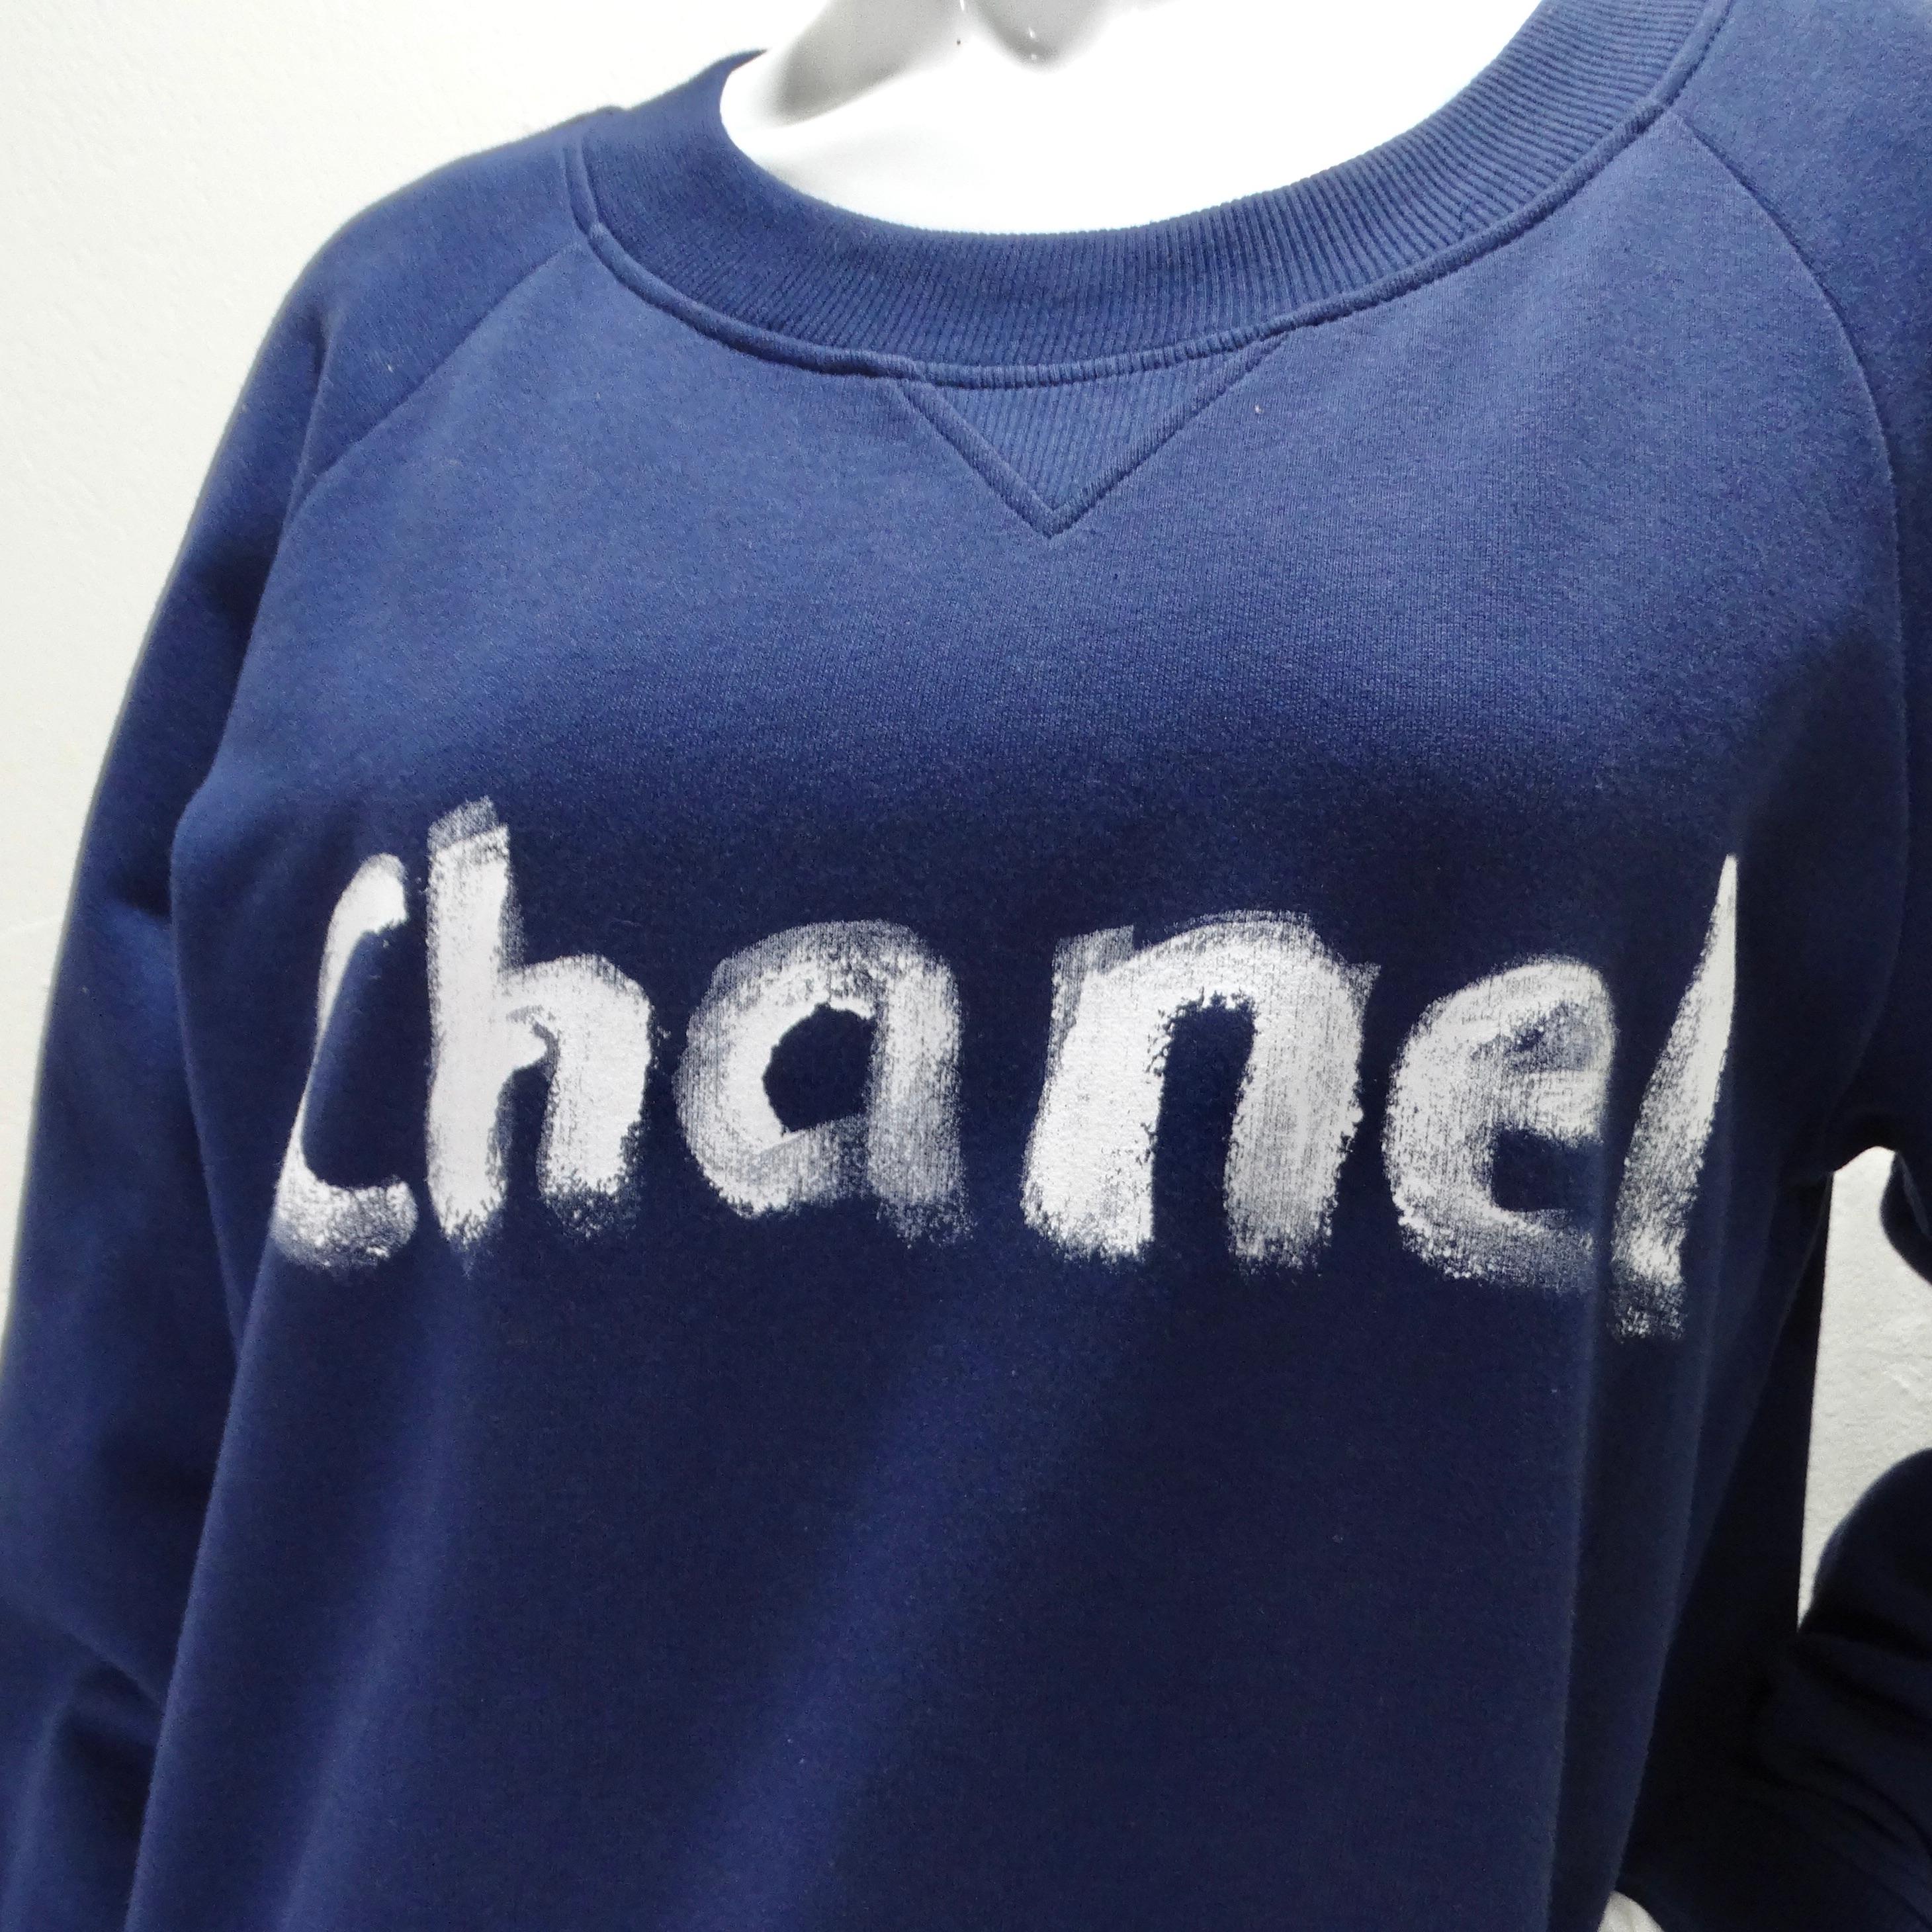 Chanel 2013 Limited Edition Navy Logo Sweatshirt In Excellent Condition For Sale In Scottsdale, AZ